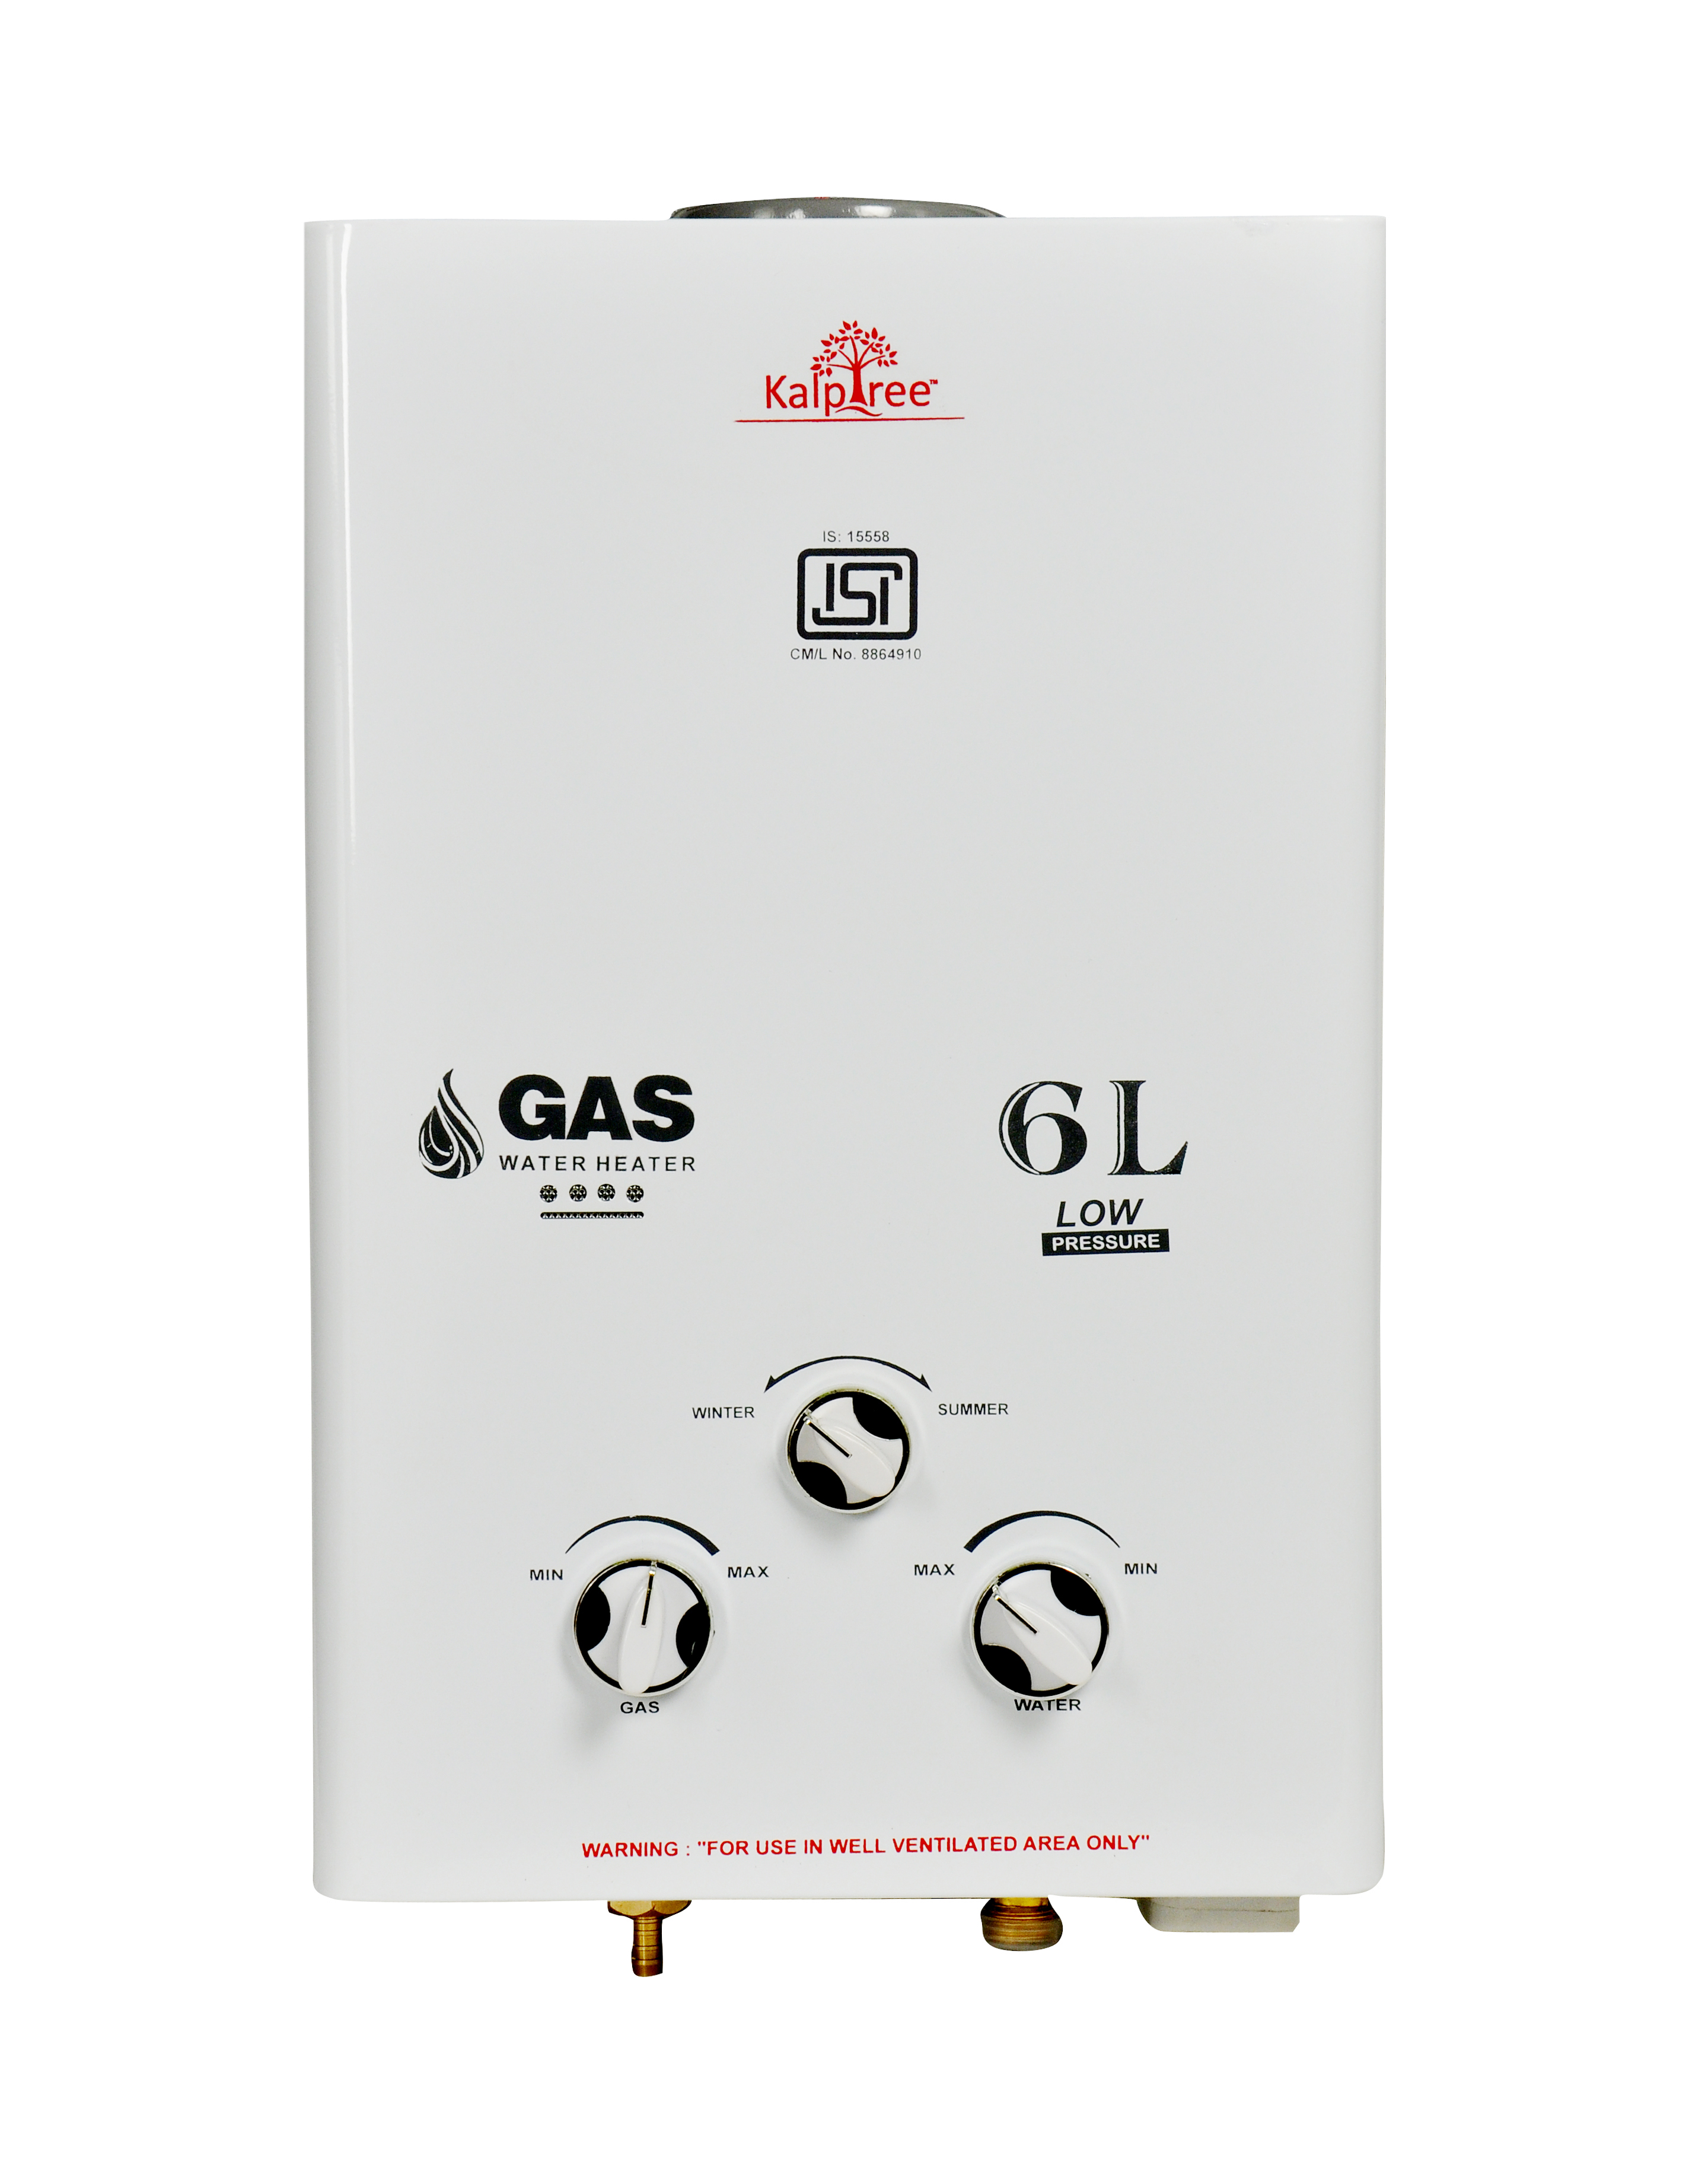 Gas Water Heater Manufacturers in India